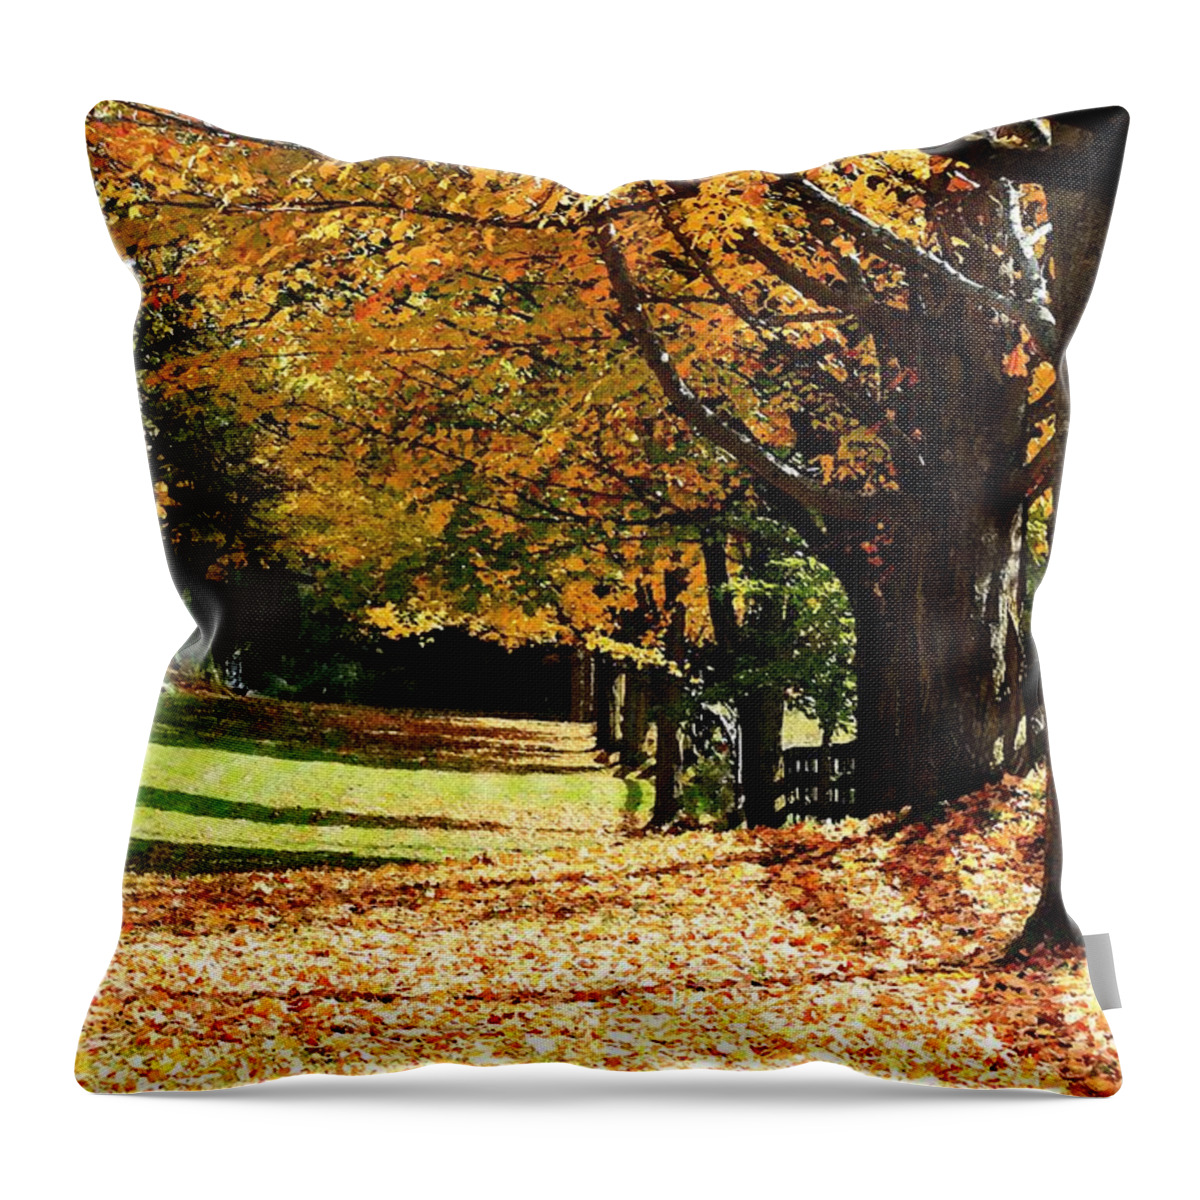 Mccombie Throw Pillow featuring the painting Fall Foliage #1 by J McCombie